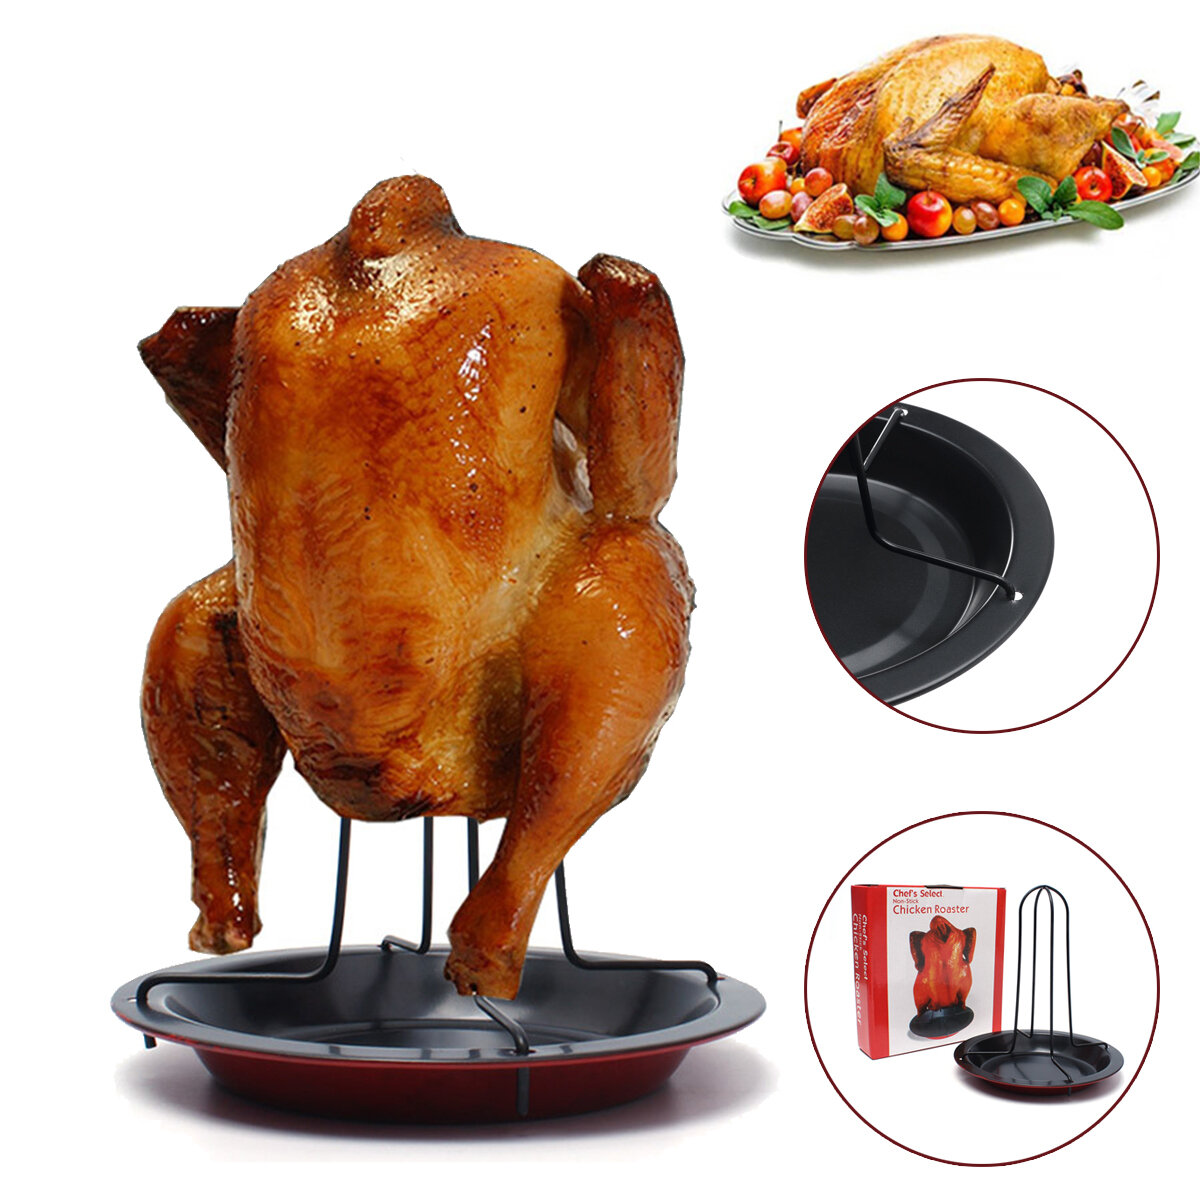 Non-stick Carbon Steel Chicken Roaster Duck Holder Grill Home Outdoor Camping Picnic Stand Roasting Rack